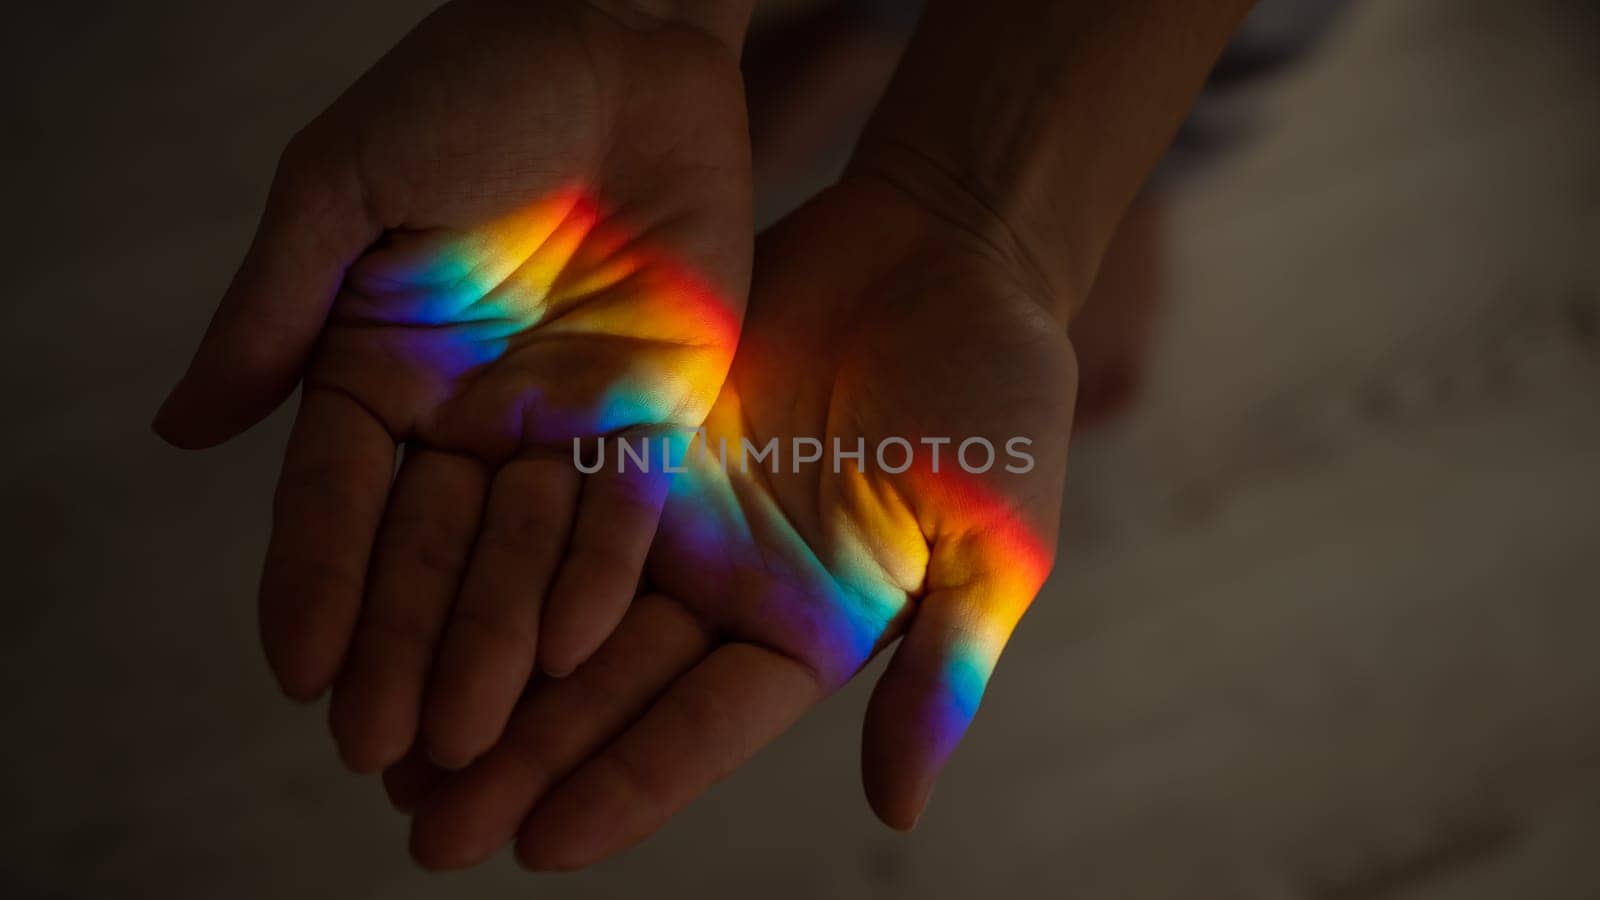 Rainbow ray on a woman's hand. by mrwed54